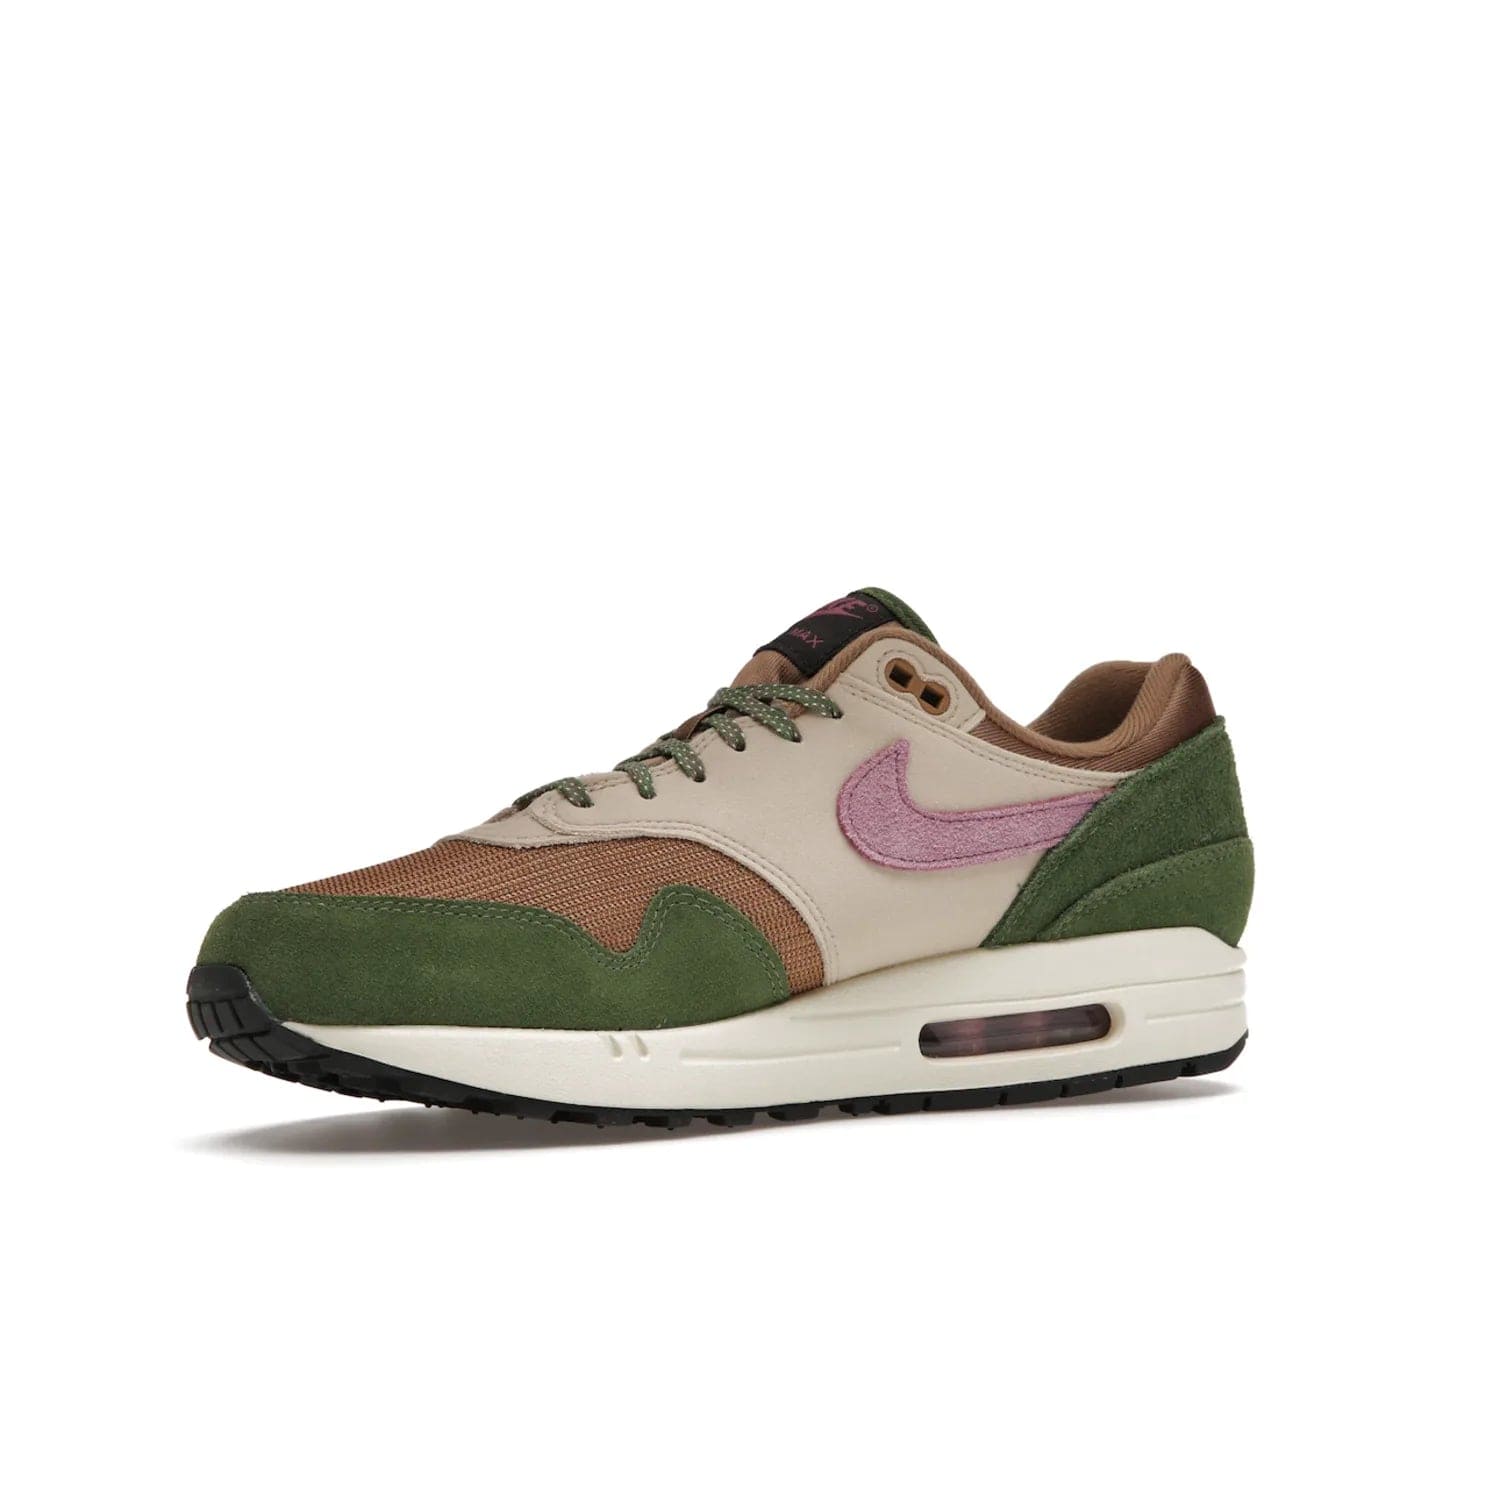 Nike Air Max 1 SH Treeline - Image 16 - Only at www.BallersClubKickz.com - A classic Nike Air Max 1 SH Treeline with a brown mesh upper, taupe Durabuck overlays, and hairy green suede details. Light Bordeaux Swoosh and woven tongue label for a pop of color. Released in May 2022. Perfect for any outfit and sure to impress.